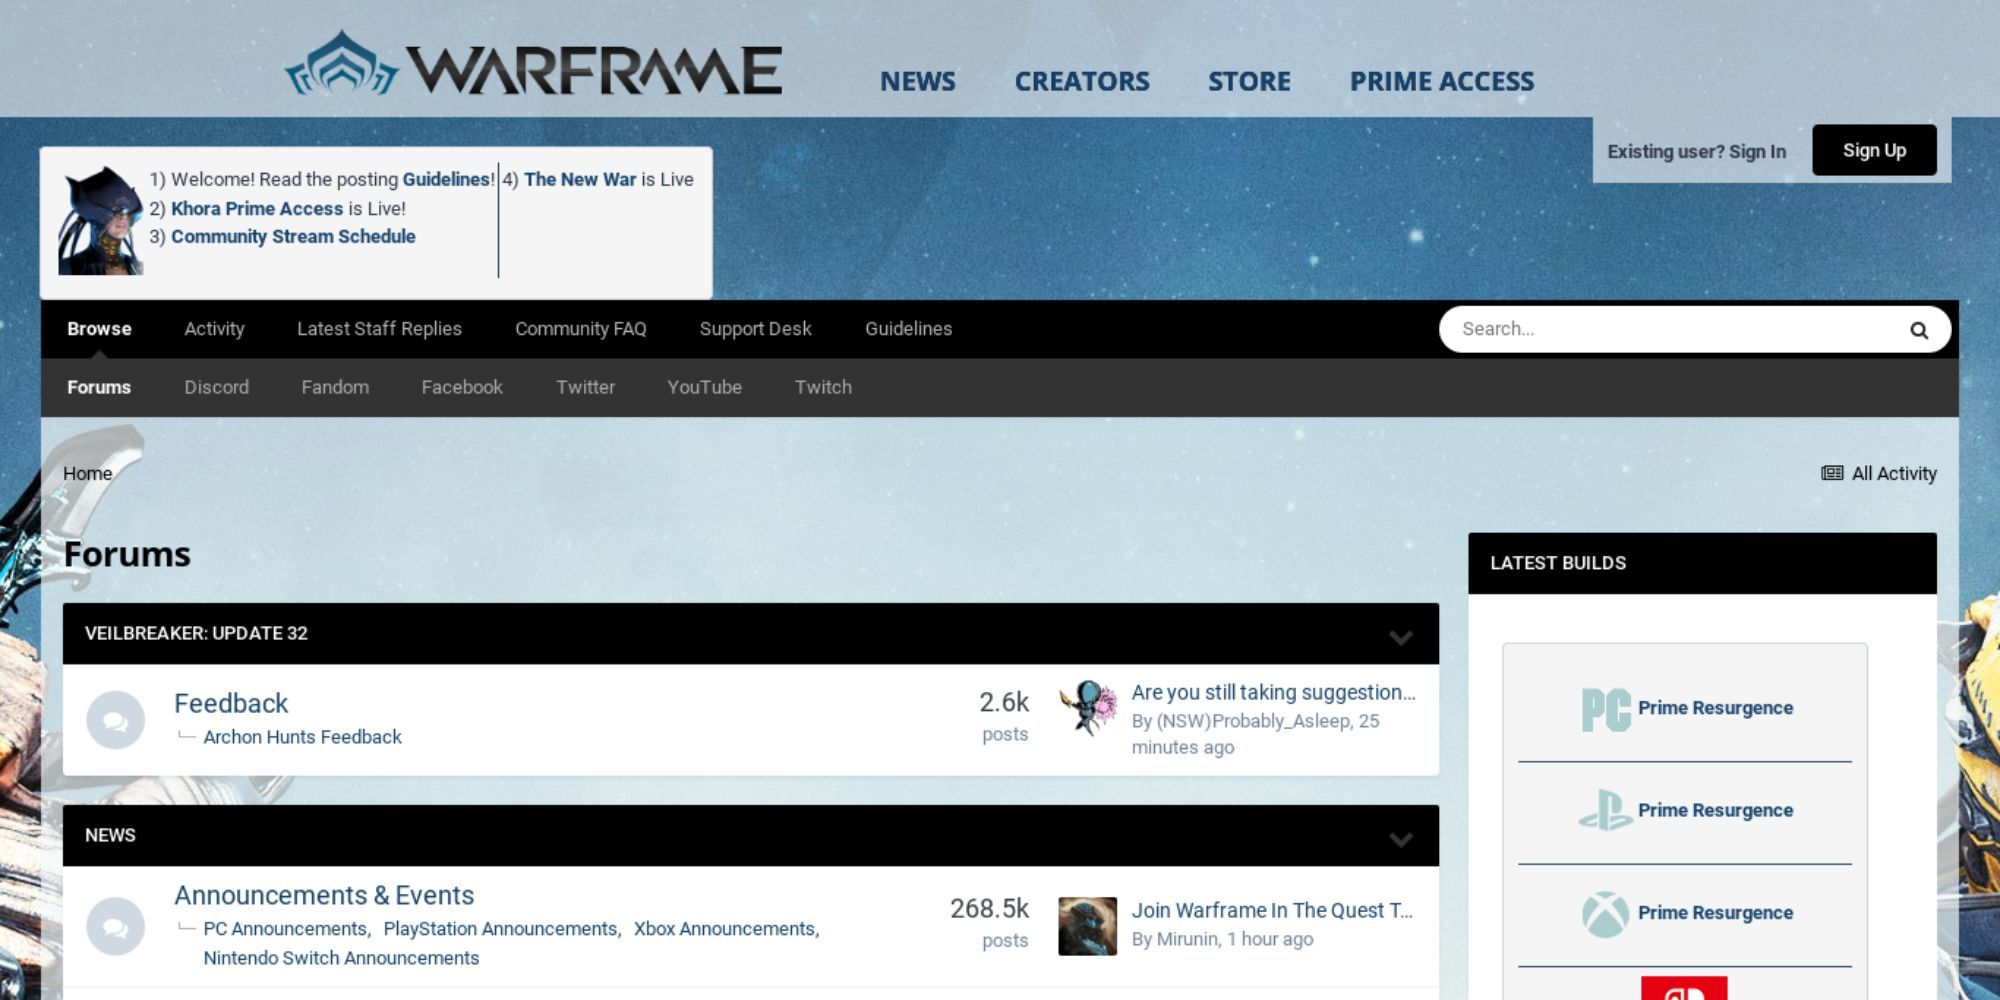 The home page of the Warframe forums